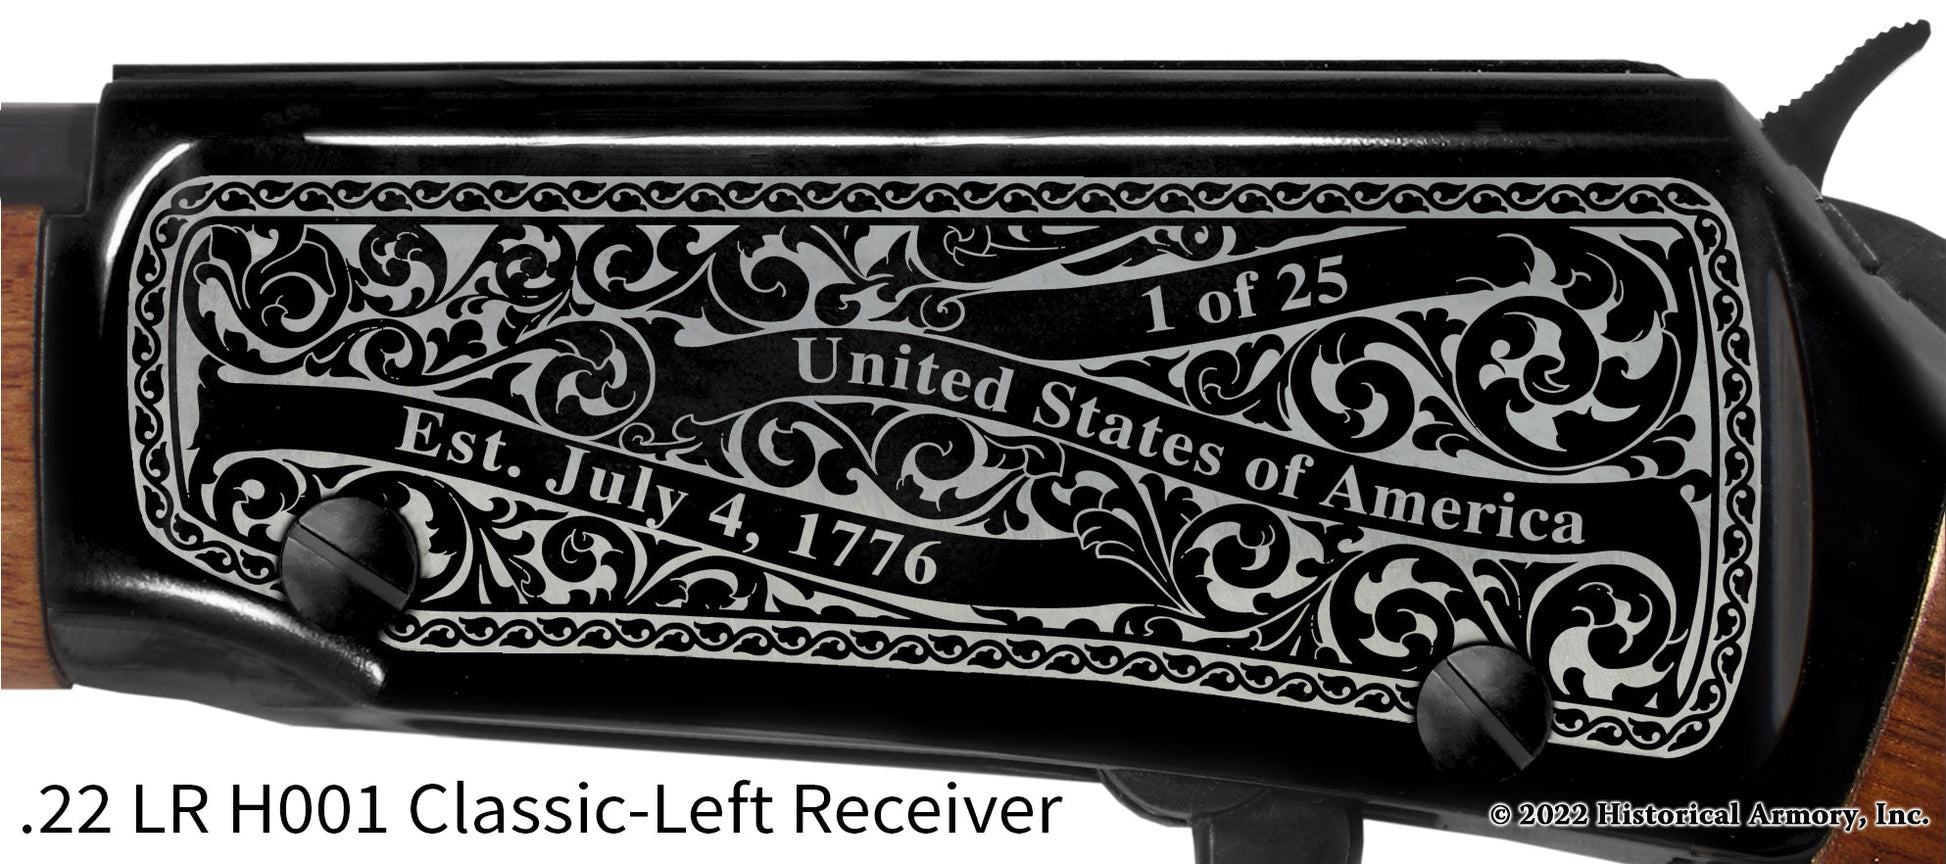 Rockcastle County Kentucky Engraved Henry H001 Rifle